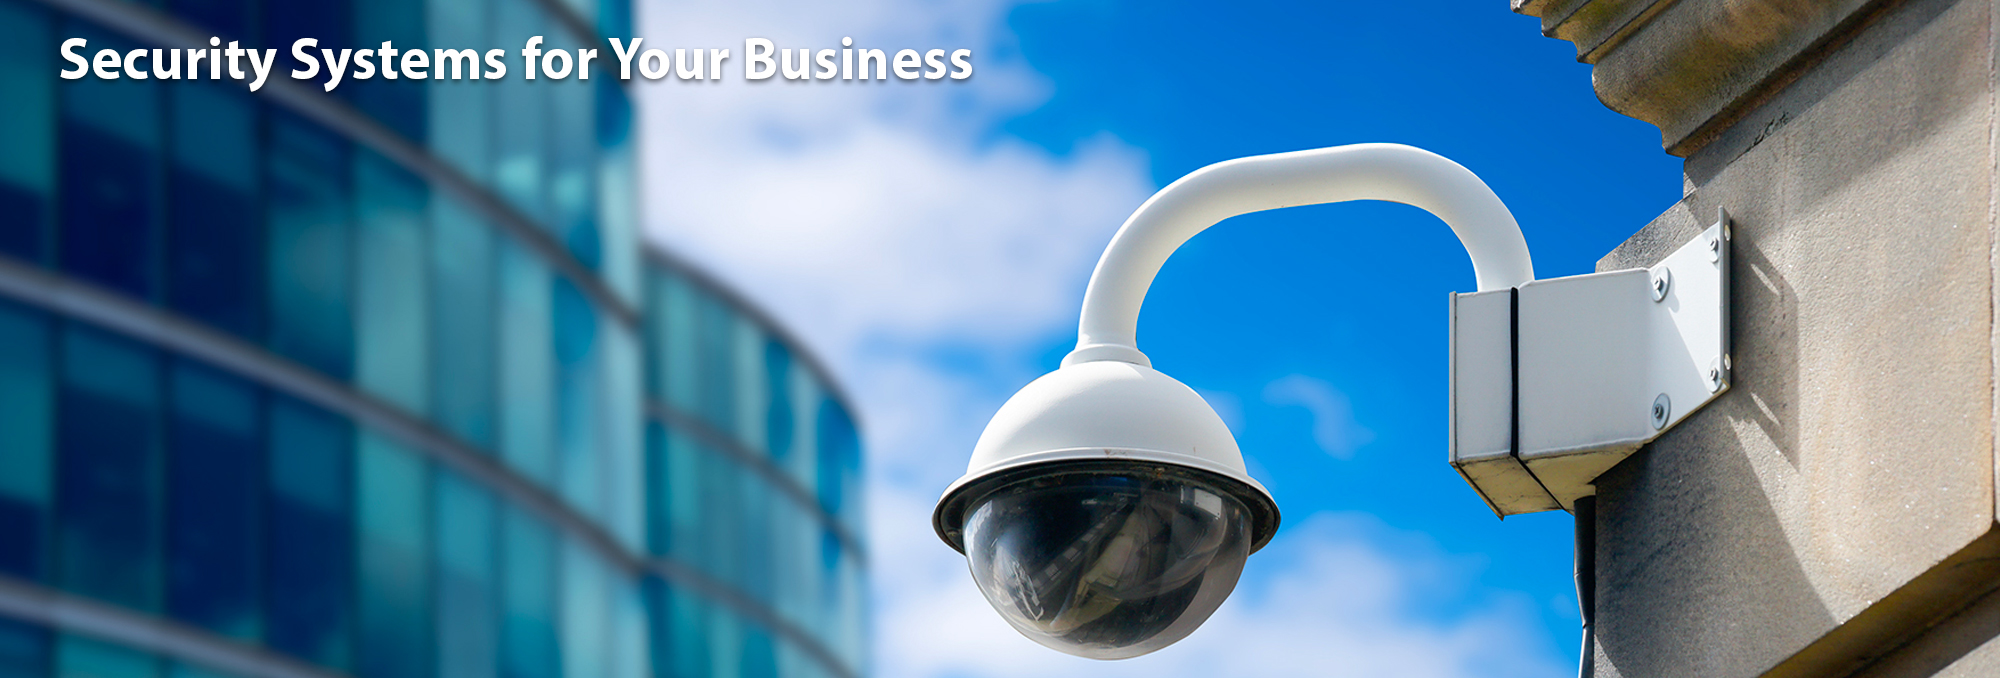 Advanced Electronic Systems   Security System For Your Business